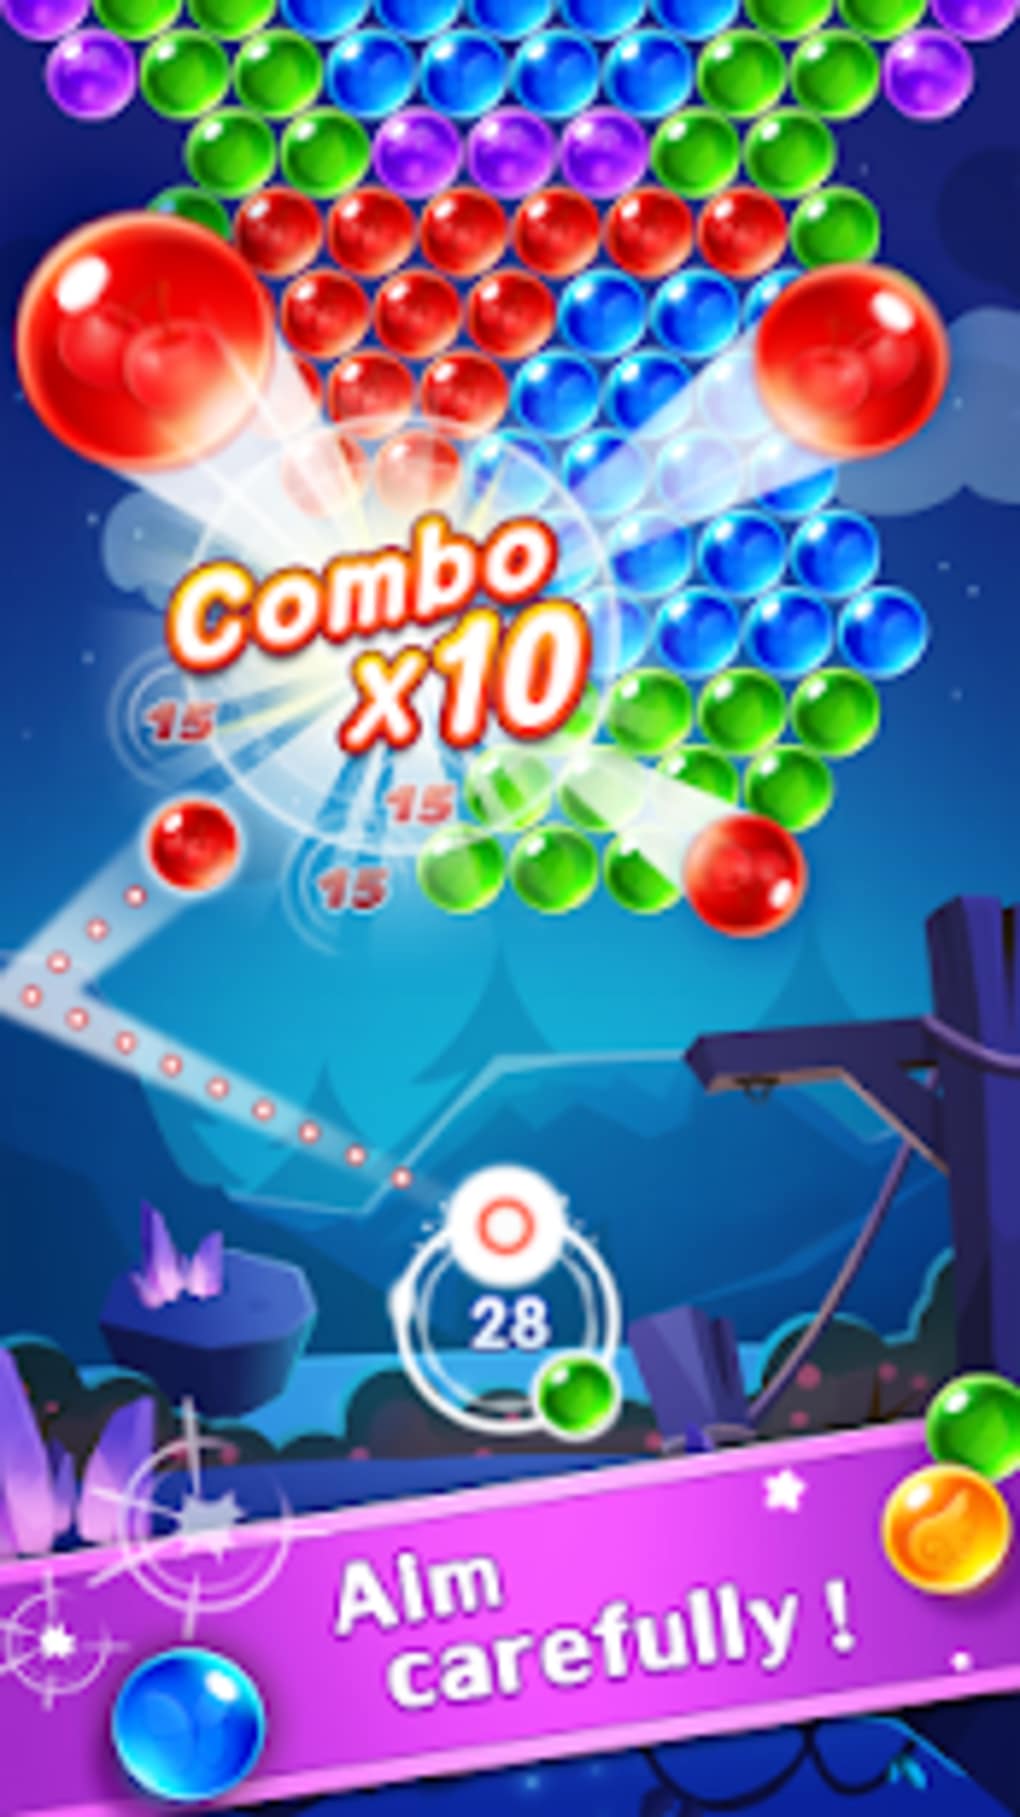 Stream Bubble Shooter Arcade APK: The Best Way to Experience the Original Bubble  Shooter Game on Android by LaesaZlenwo